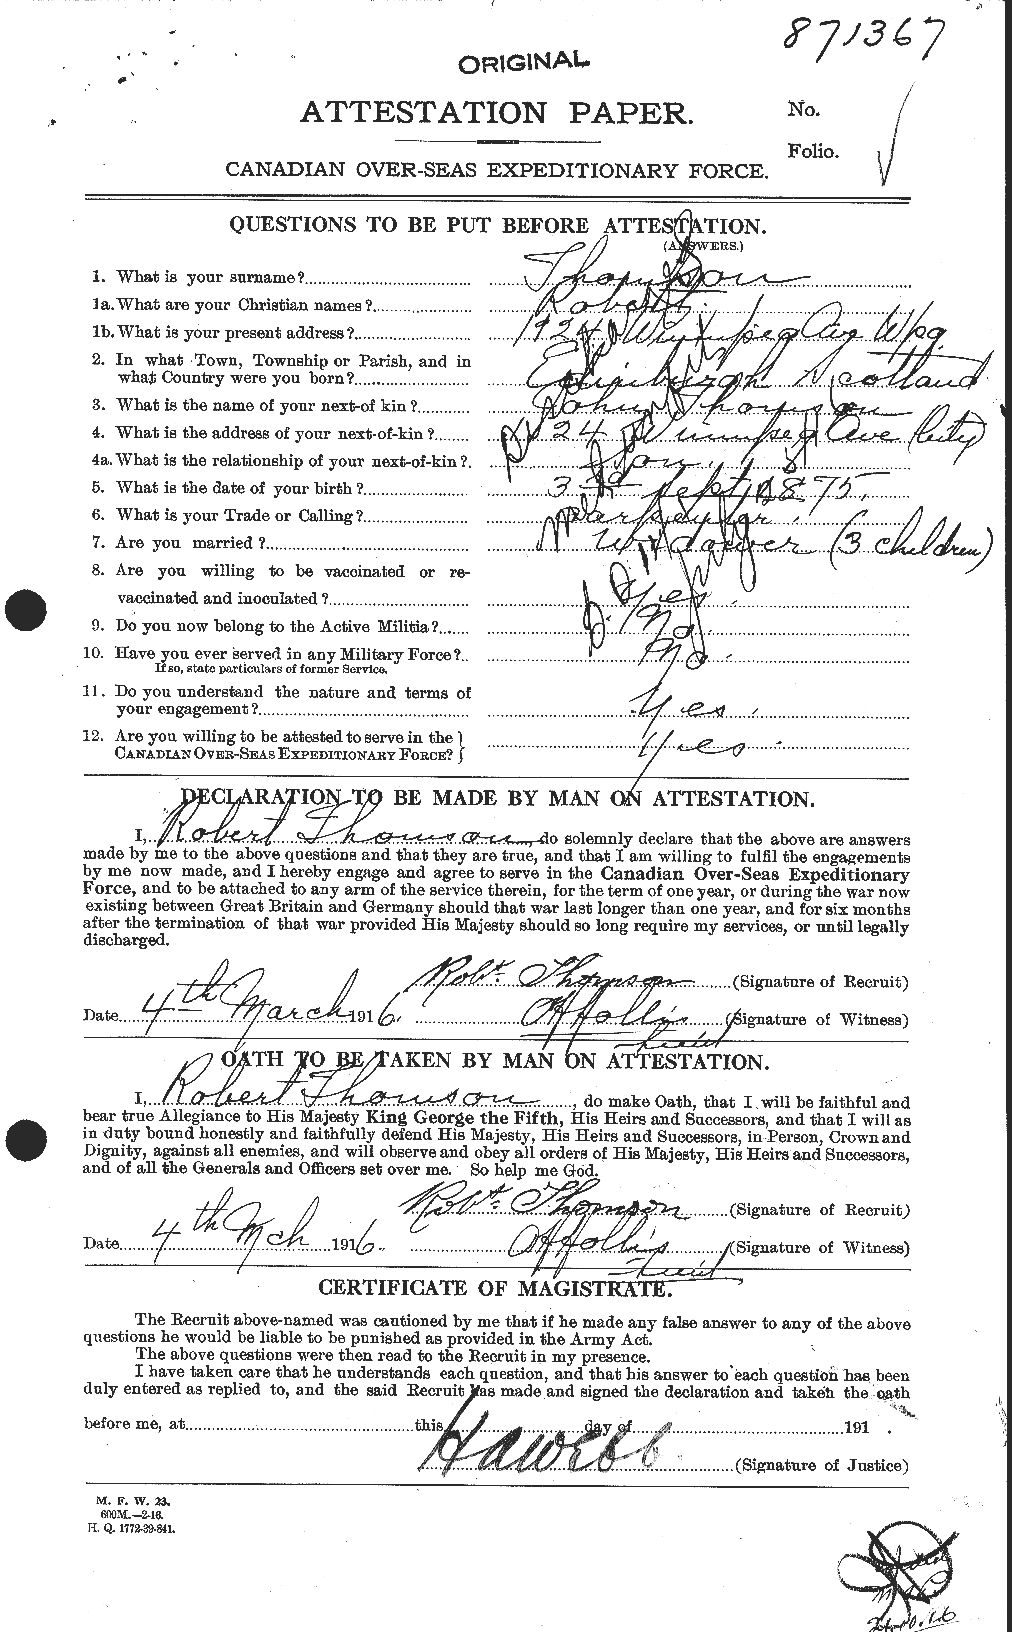 Personnel Records of the First World War - CEF 633489a